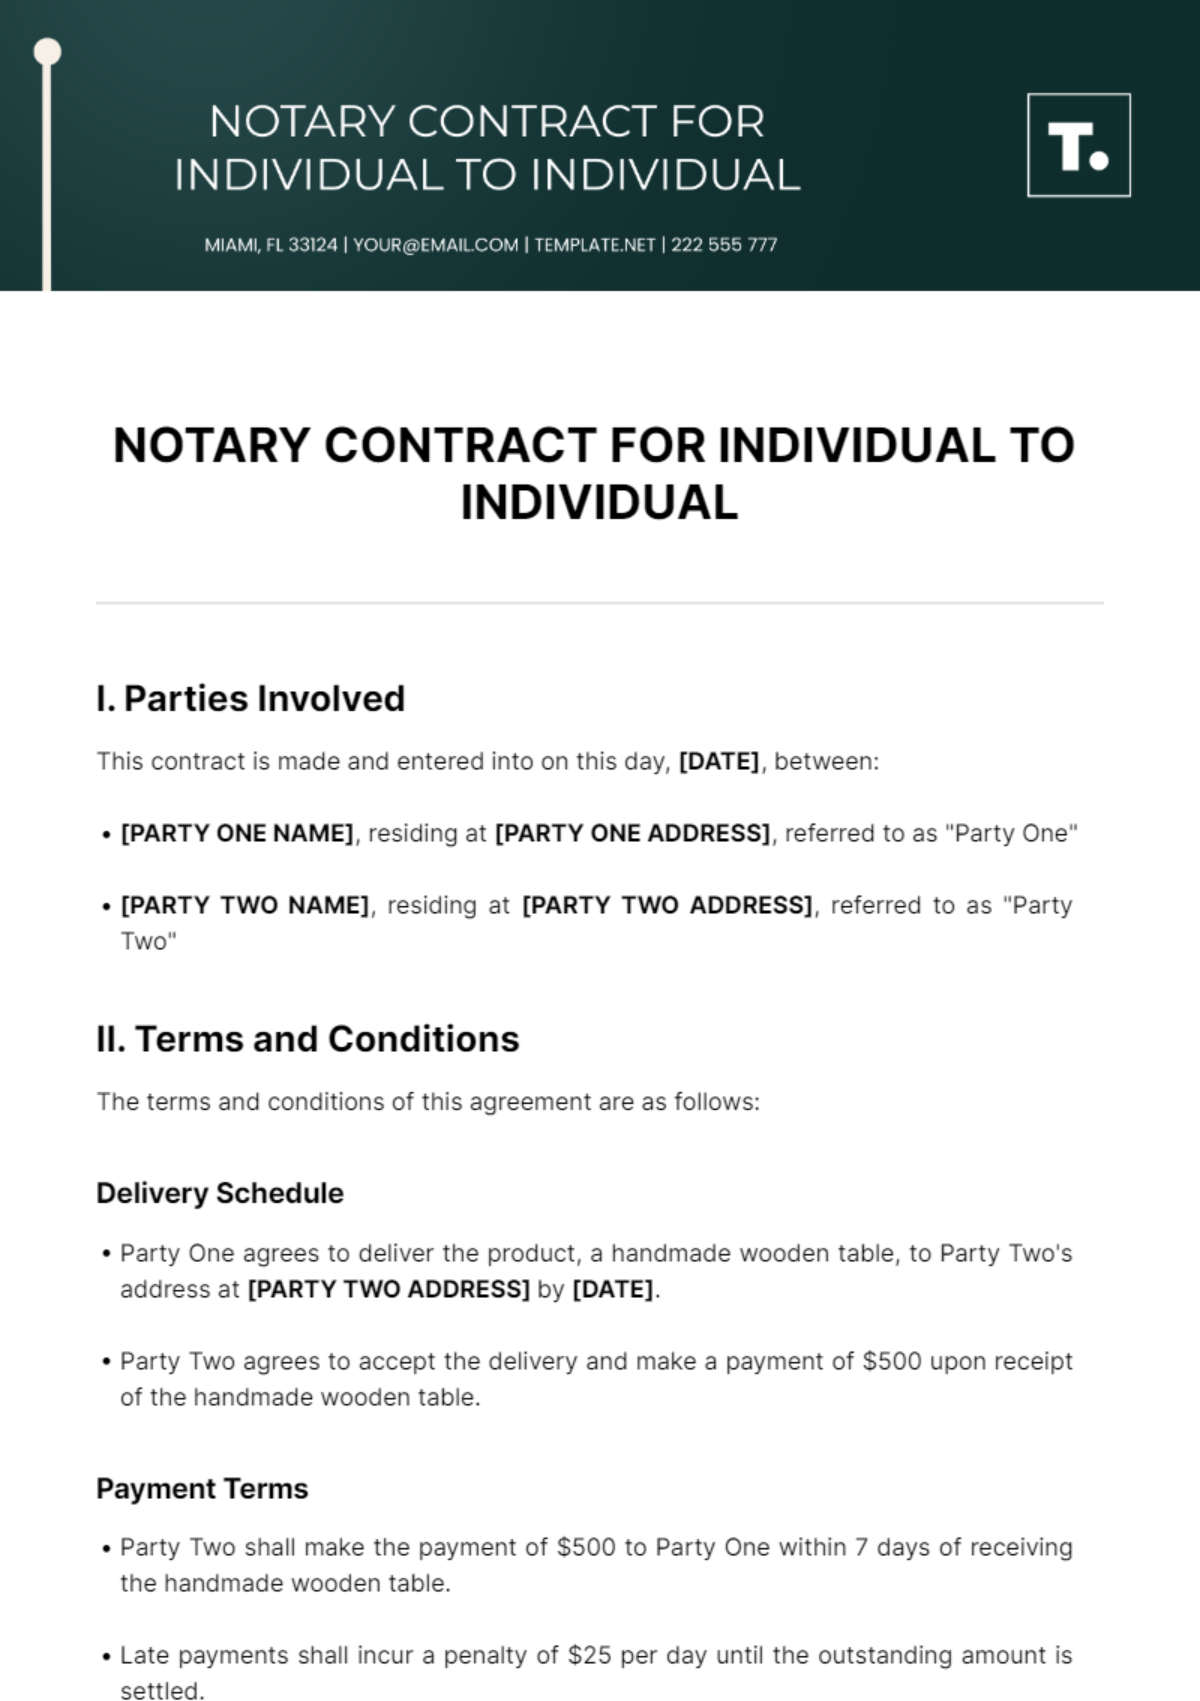 Free Notary Contract for Individual to Individual Template